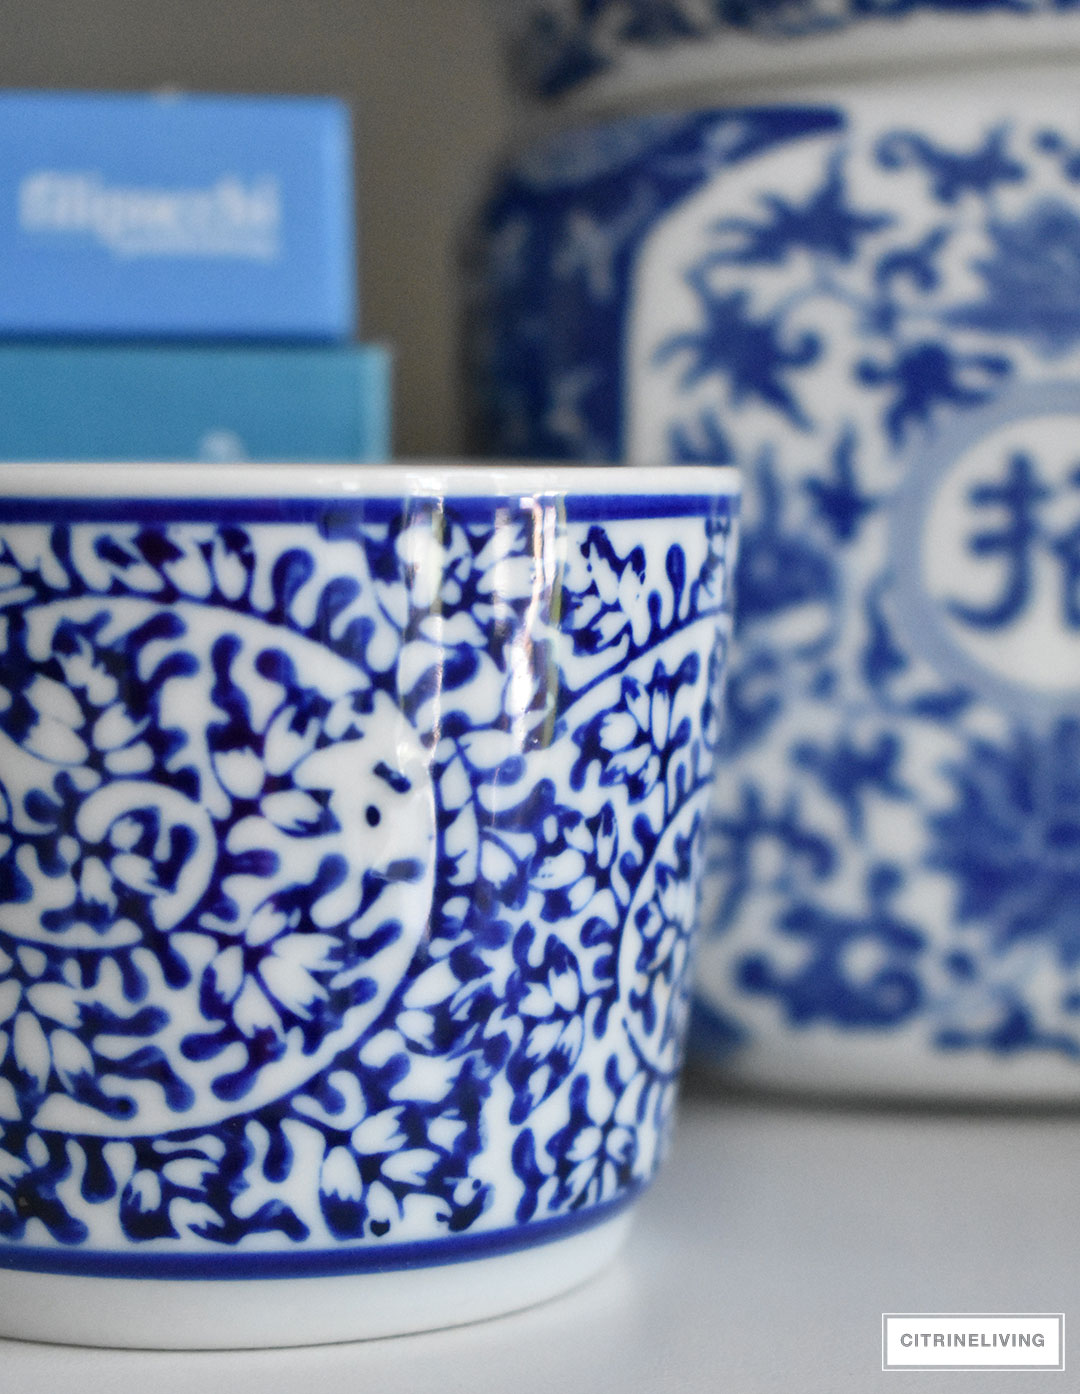 A beautiful collection of blue and white ginger jars, vases, bowls and dishes can be showcased and used anywhere throughout your home. Pair it with any color scheme and use it through any season of the year - this timeless classic will never go out of style!